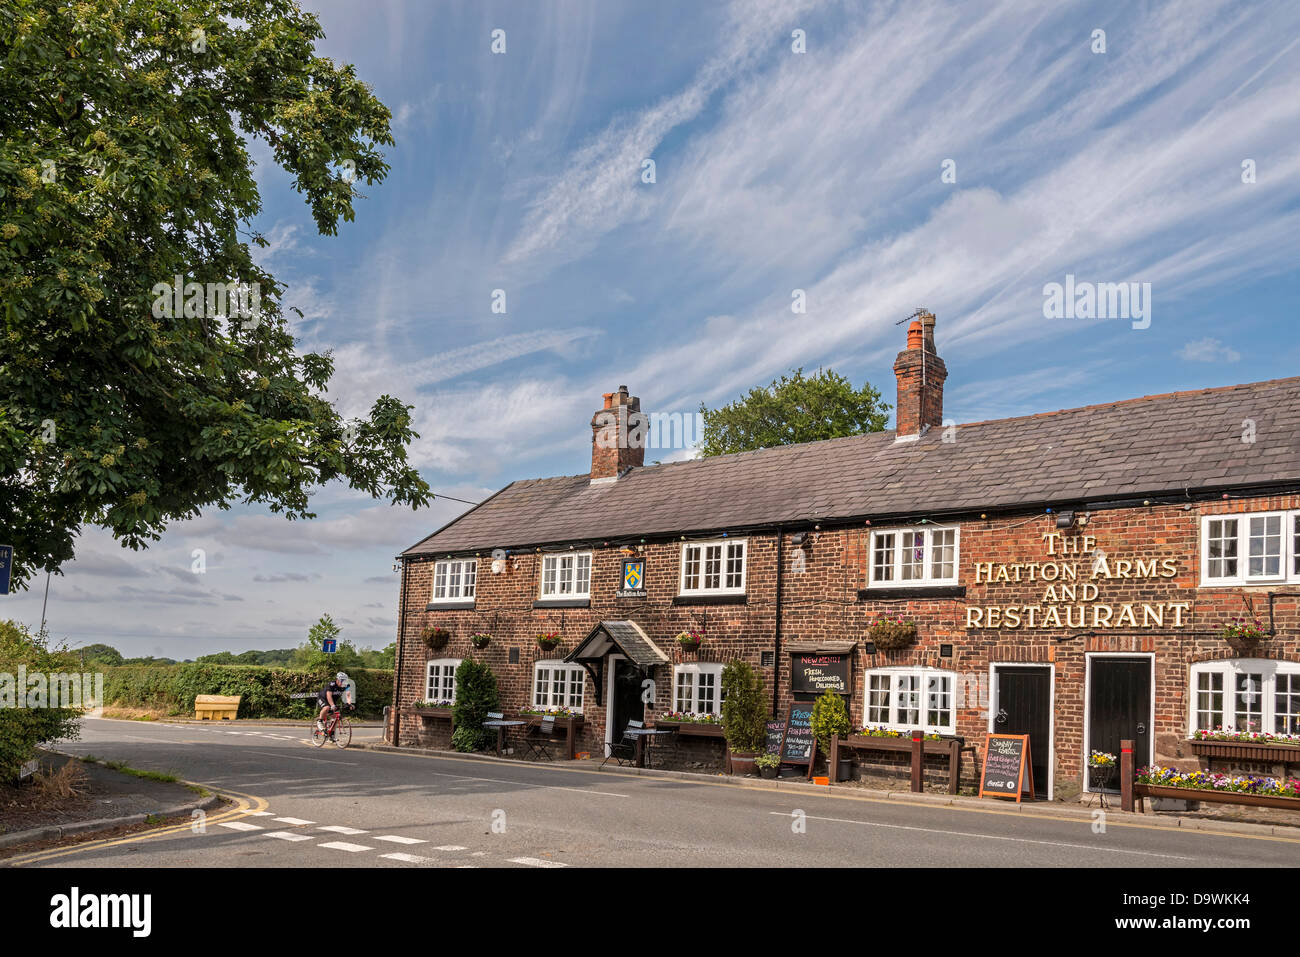 The village of Hatton. The Hatton Arms public house and restaurant. Stock Photo